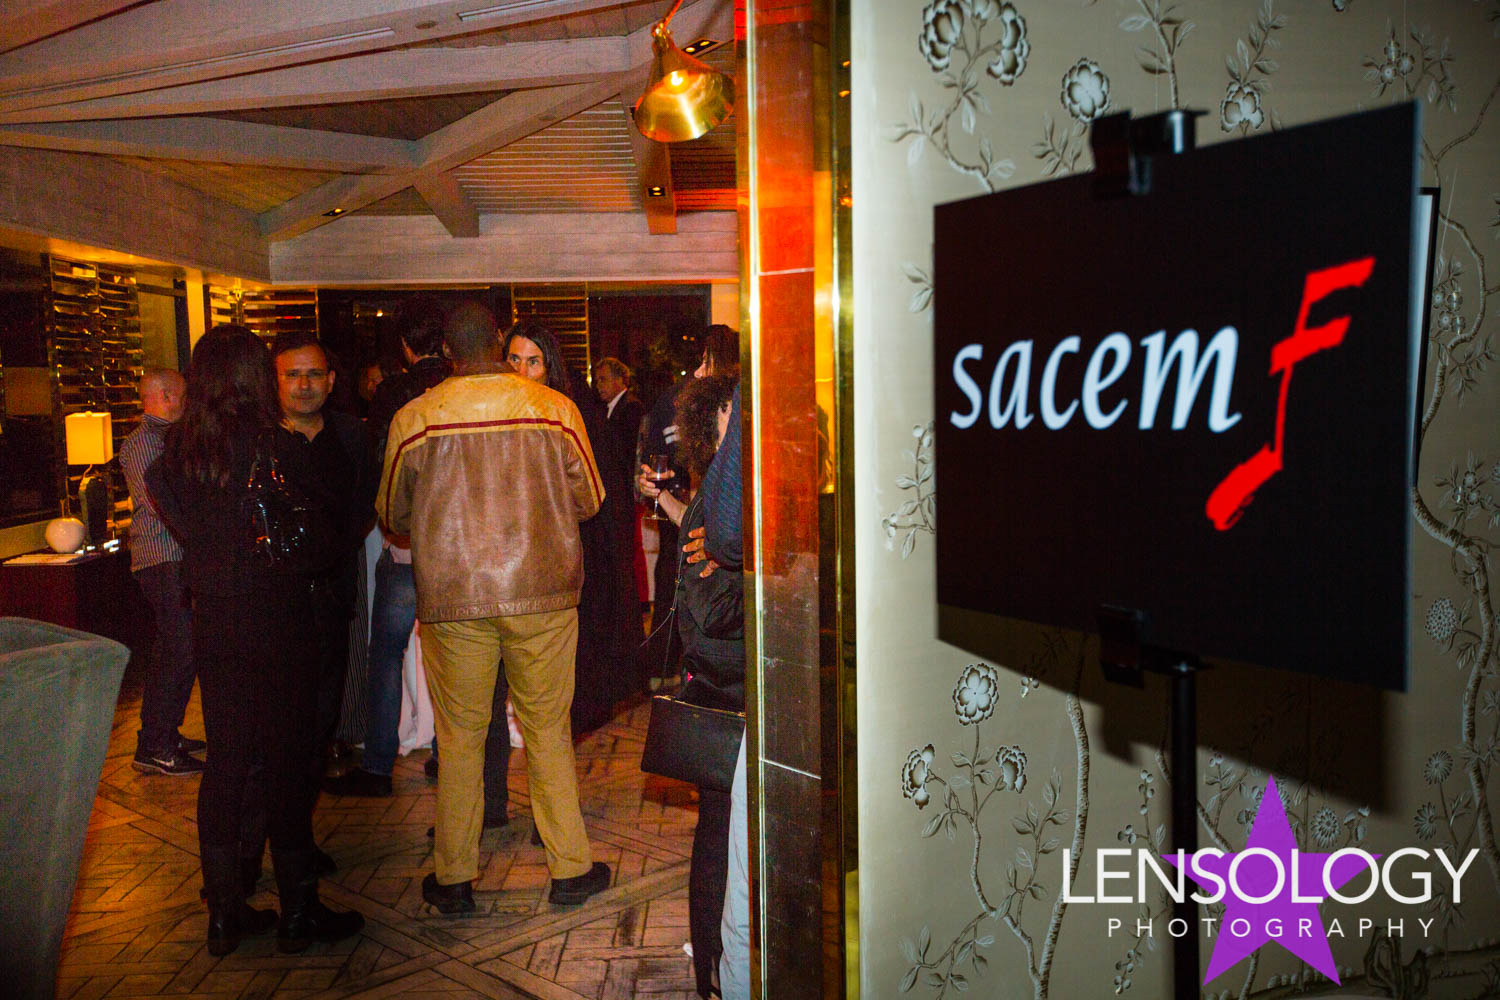 LENSOLOGY.NET - SACEM hosts a presentation and cocktail hour at The London Hotel, West Hollywood, CA.
All images are copyright of Lensology.net
Email: info@lensology.net
www.lensology.net